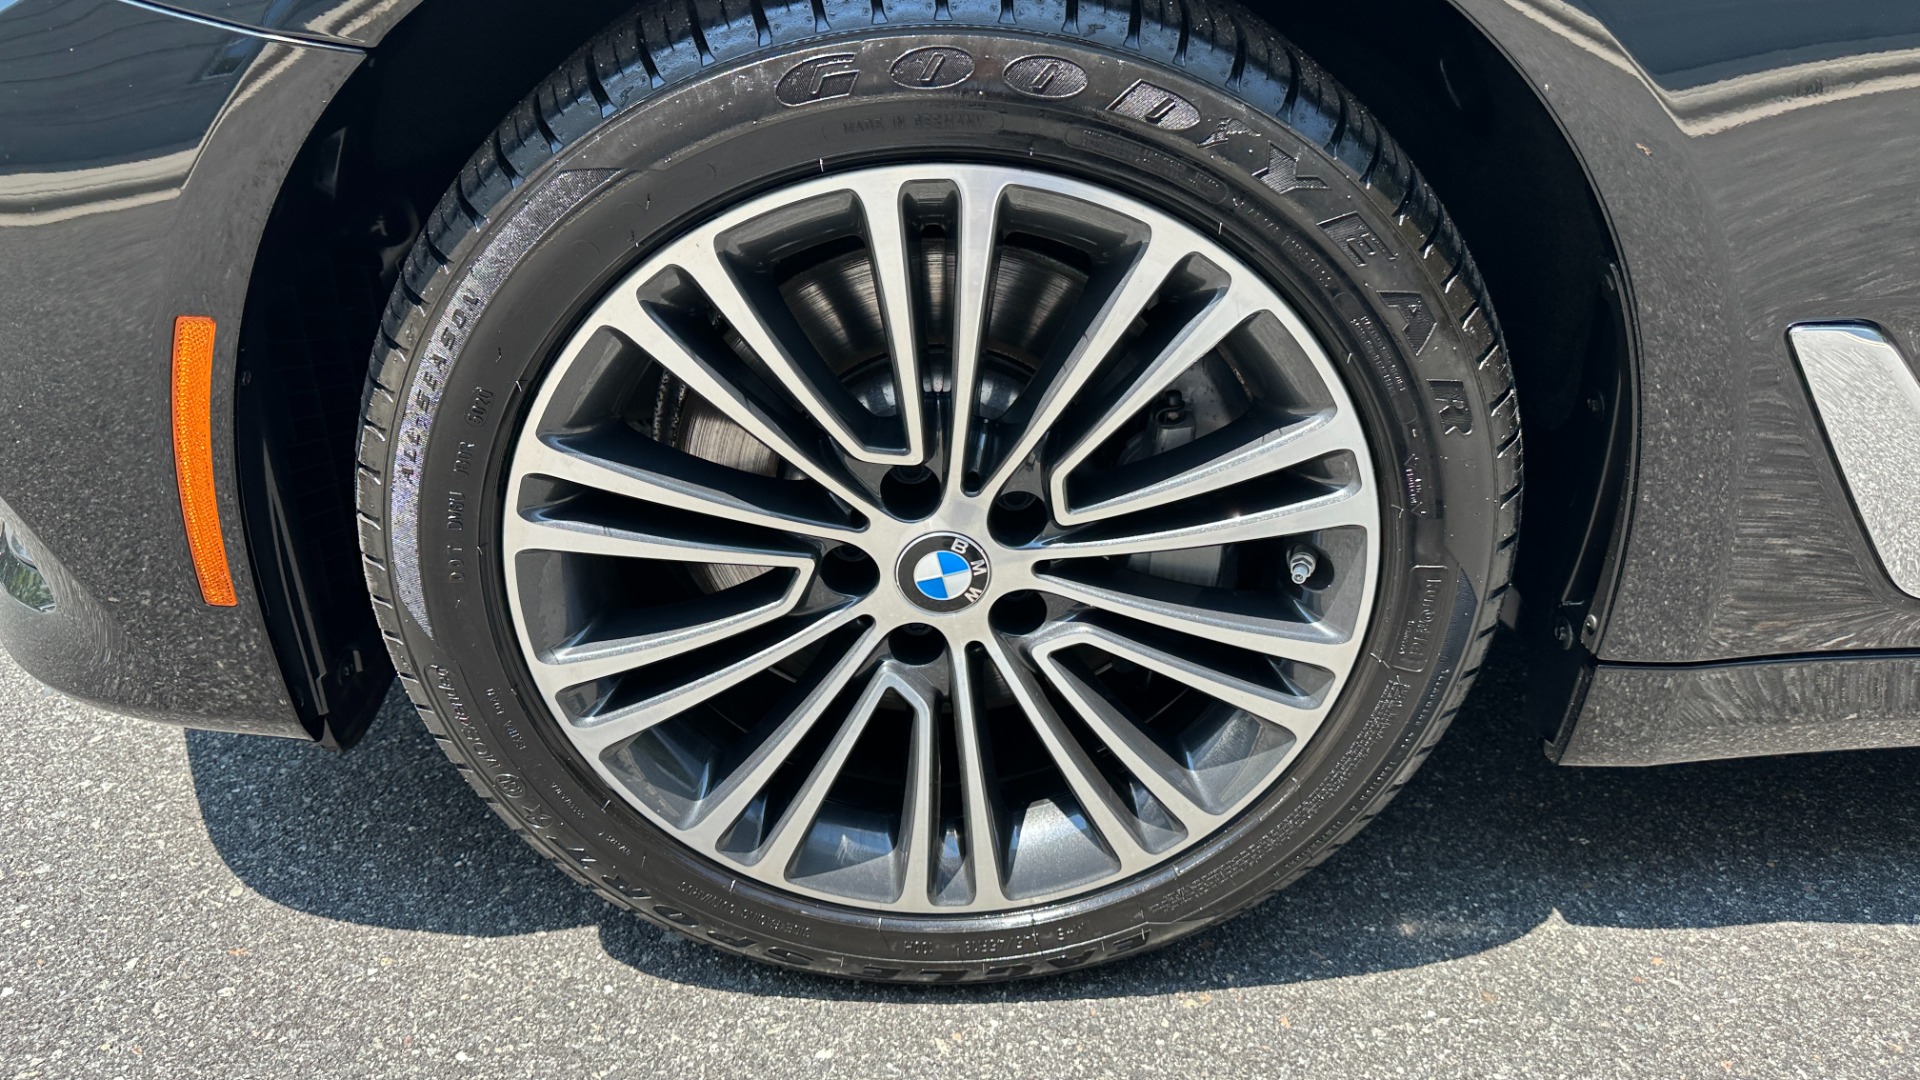 Used 2019 BMW 5 Series 530i xDrive / HEATED SEATS / NAV / SUNROOF / REARVIEW CAMERA for sale $30,795 at Formula Imports in Charlotte NC 28227 42